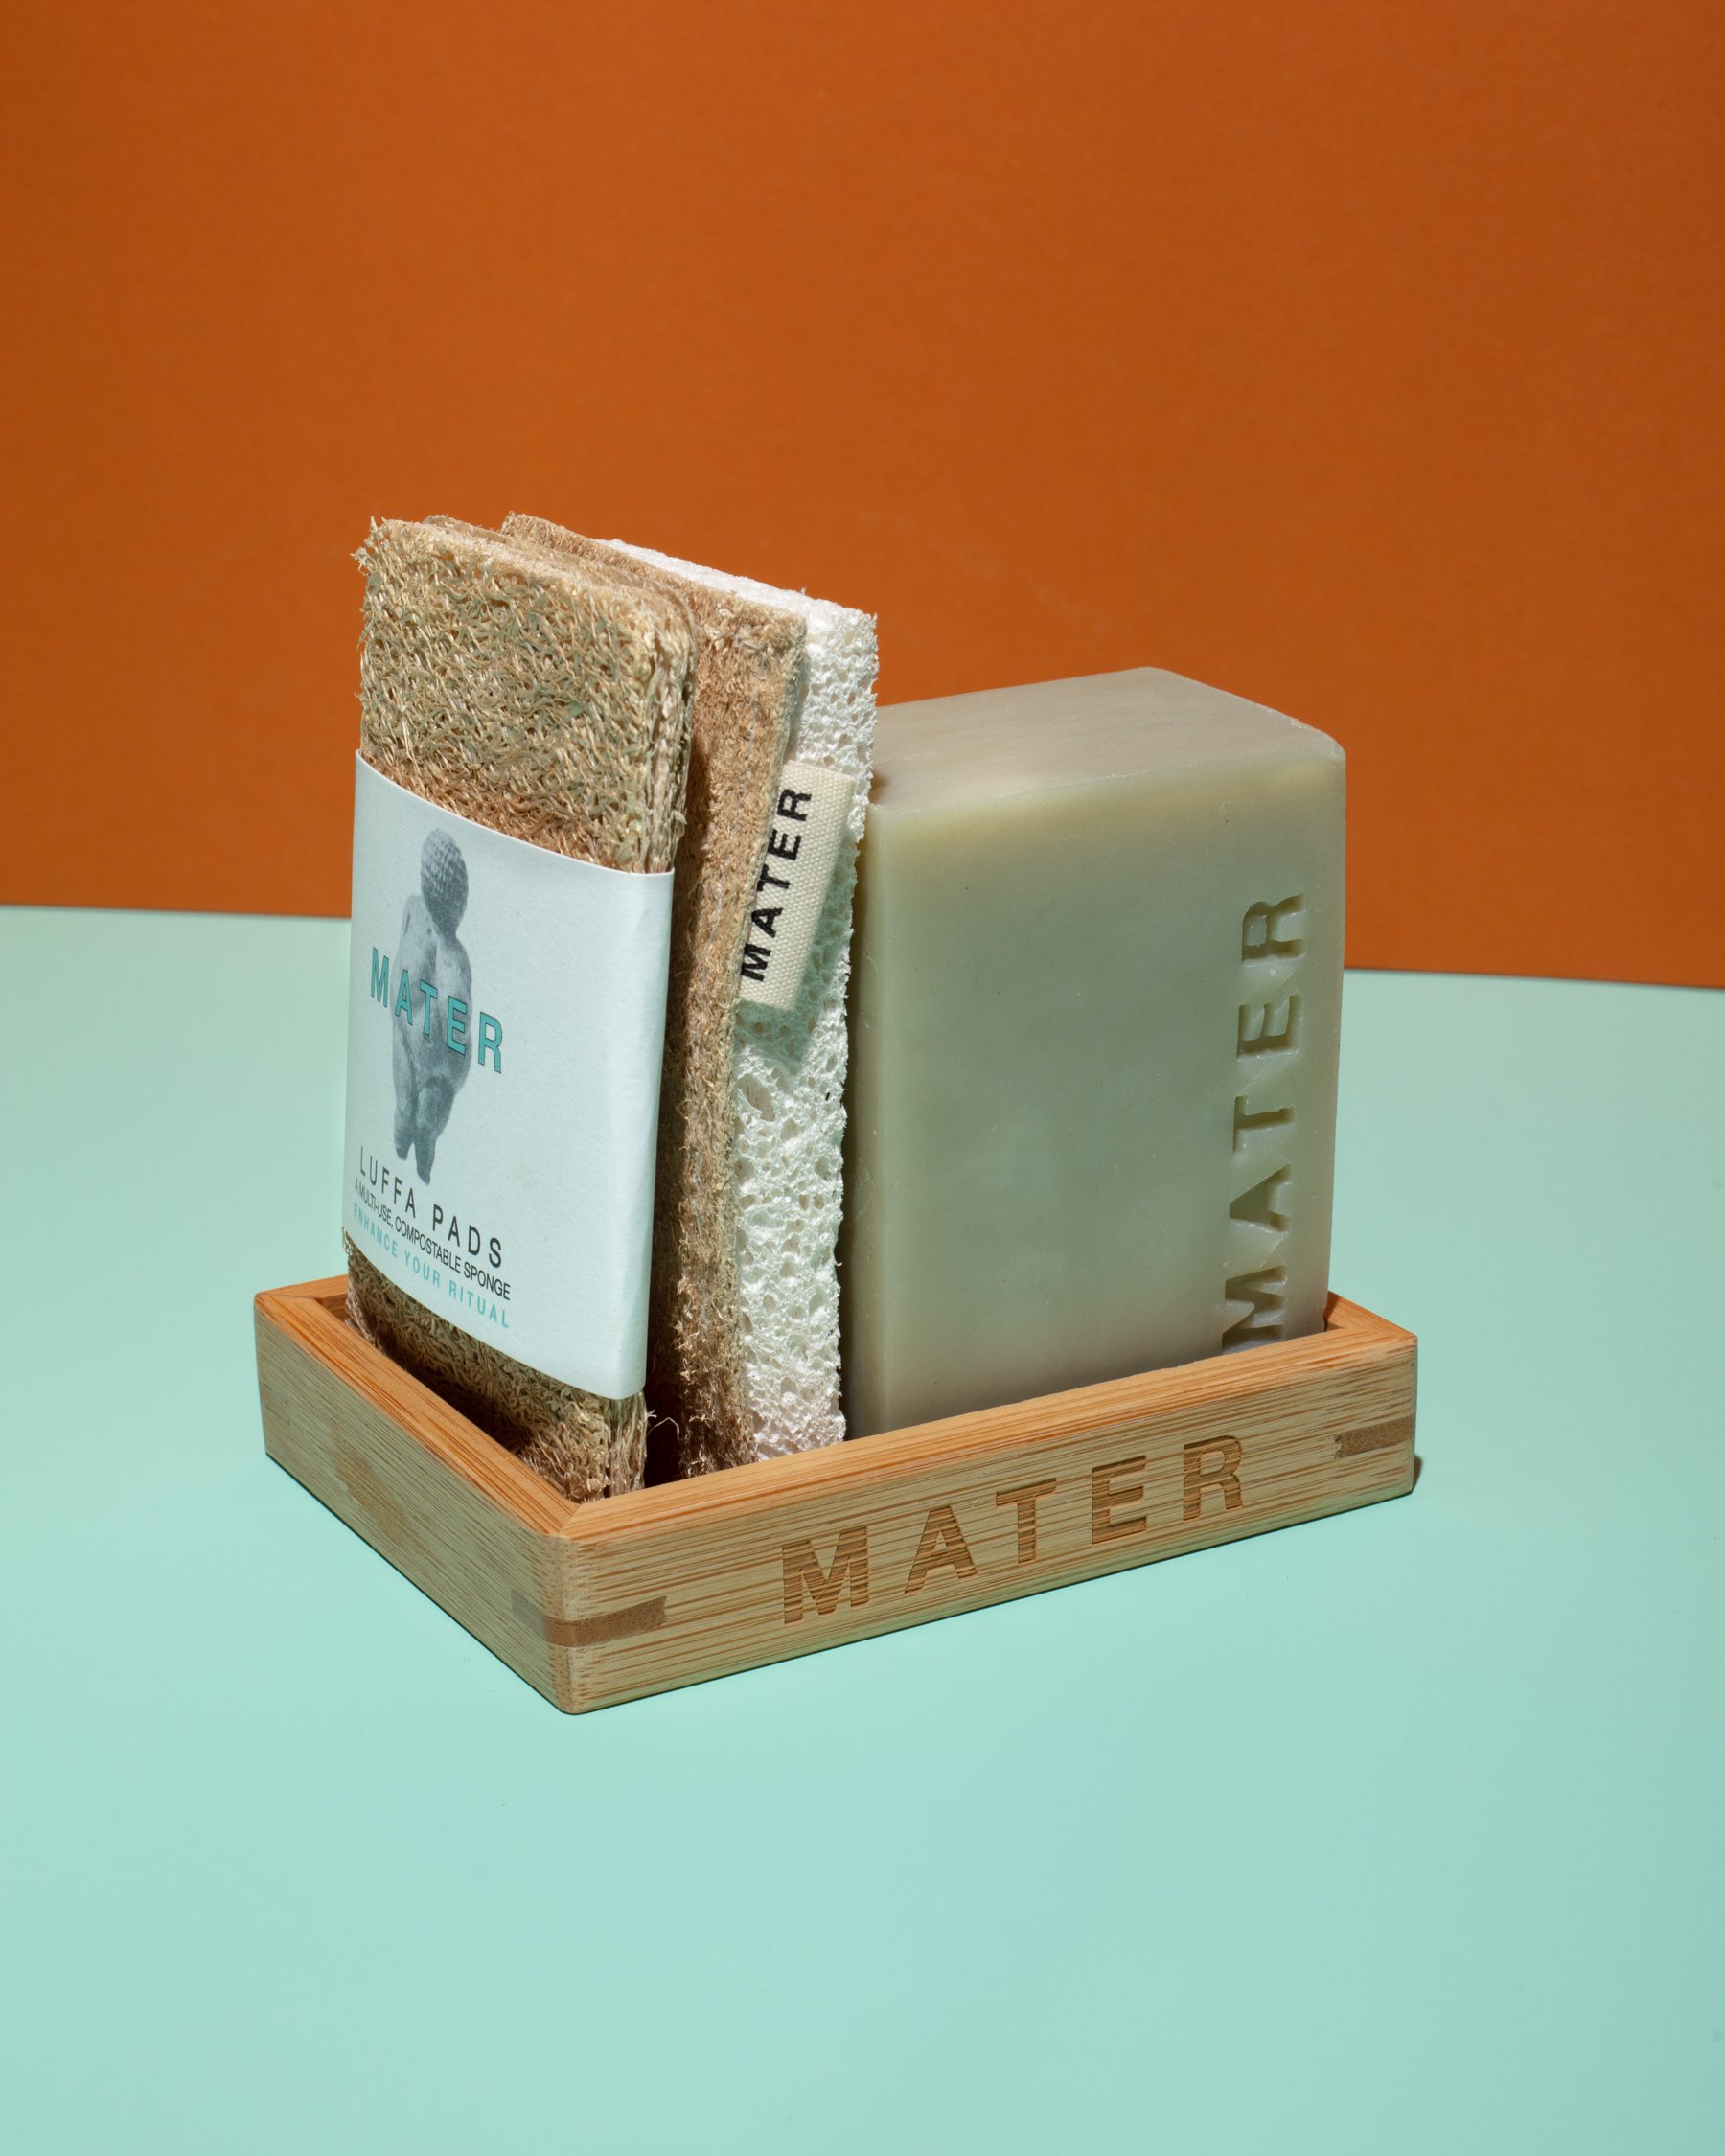 MATER SOAP